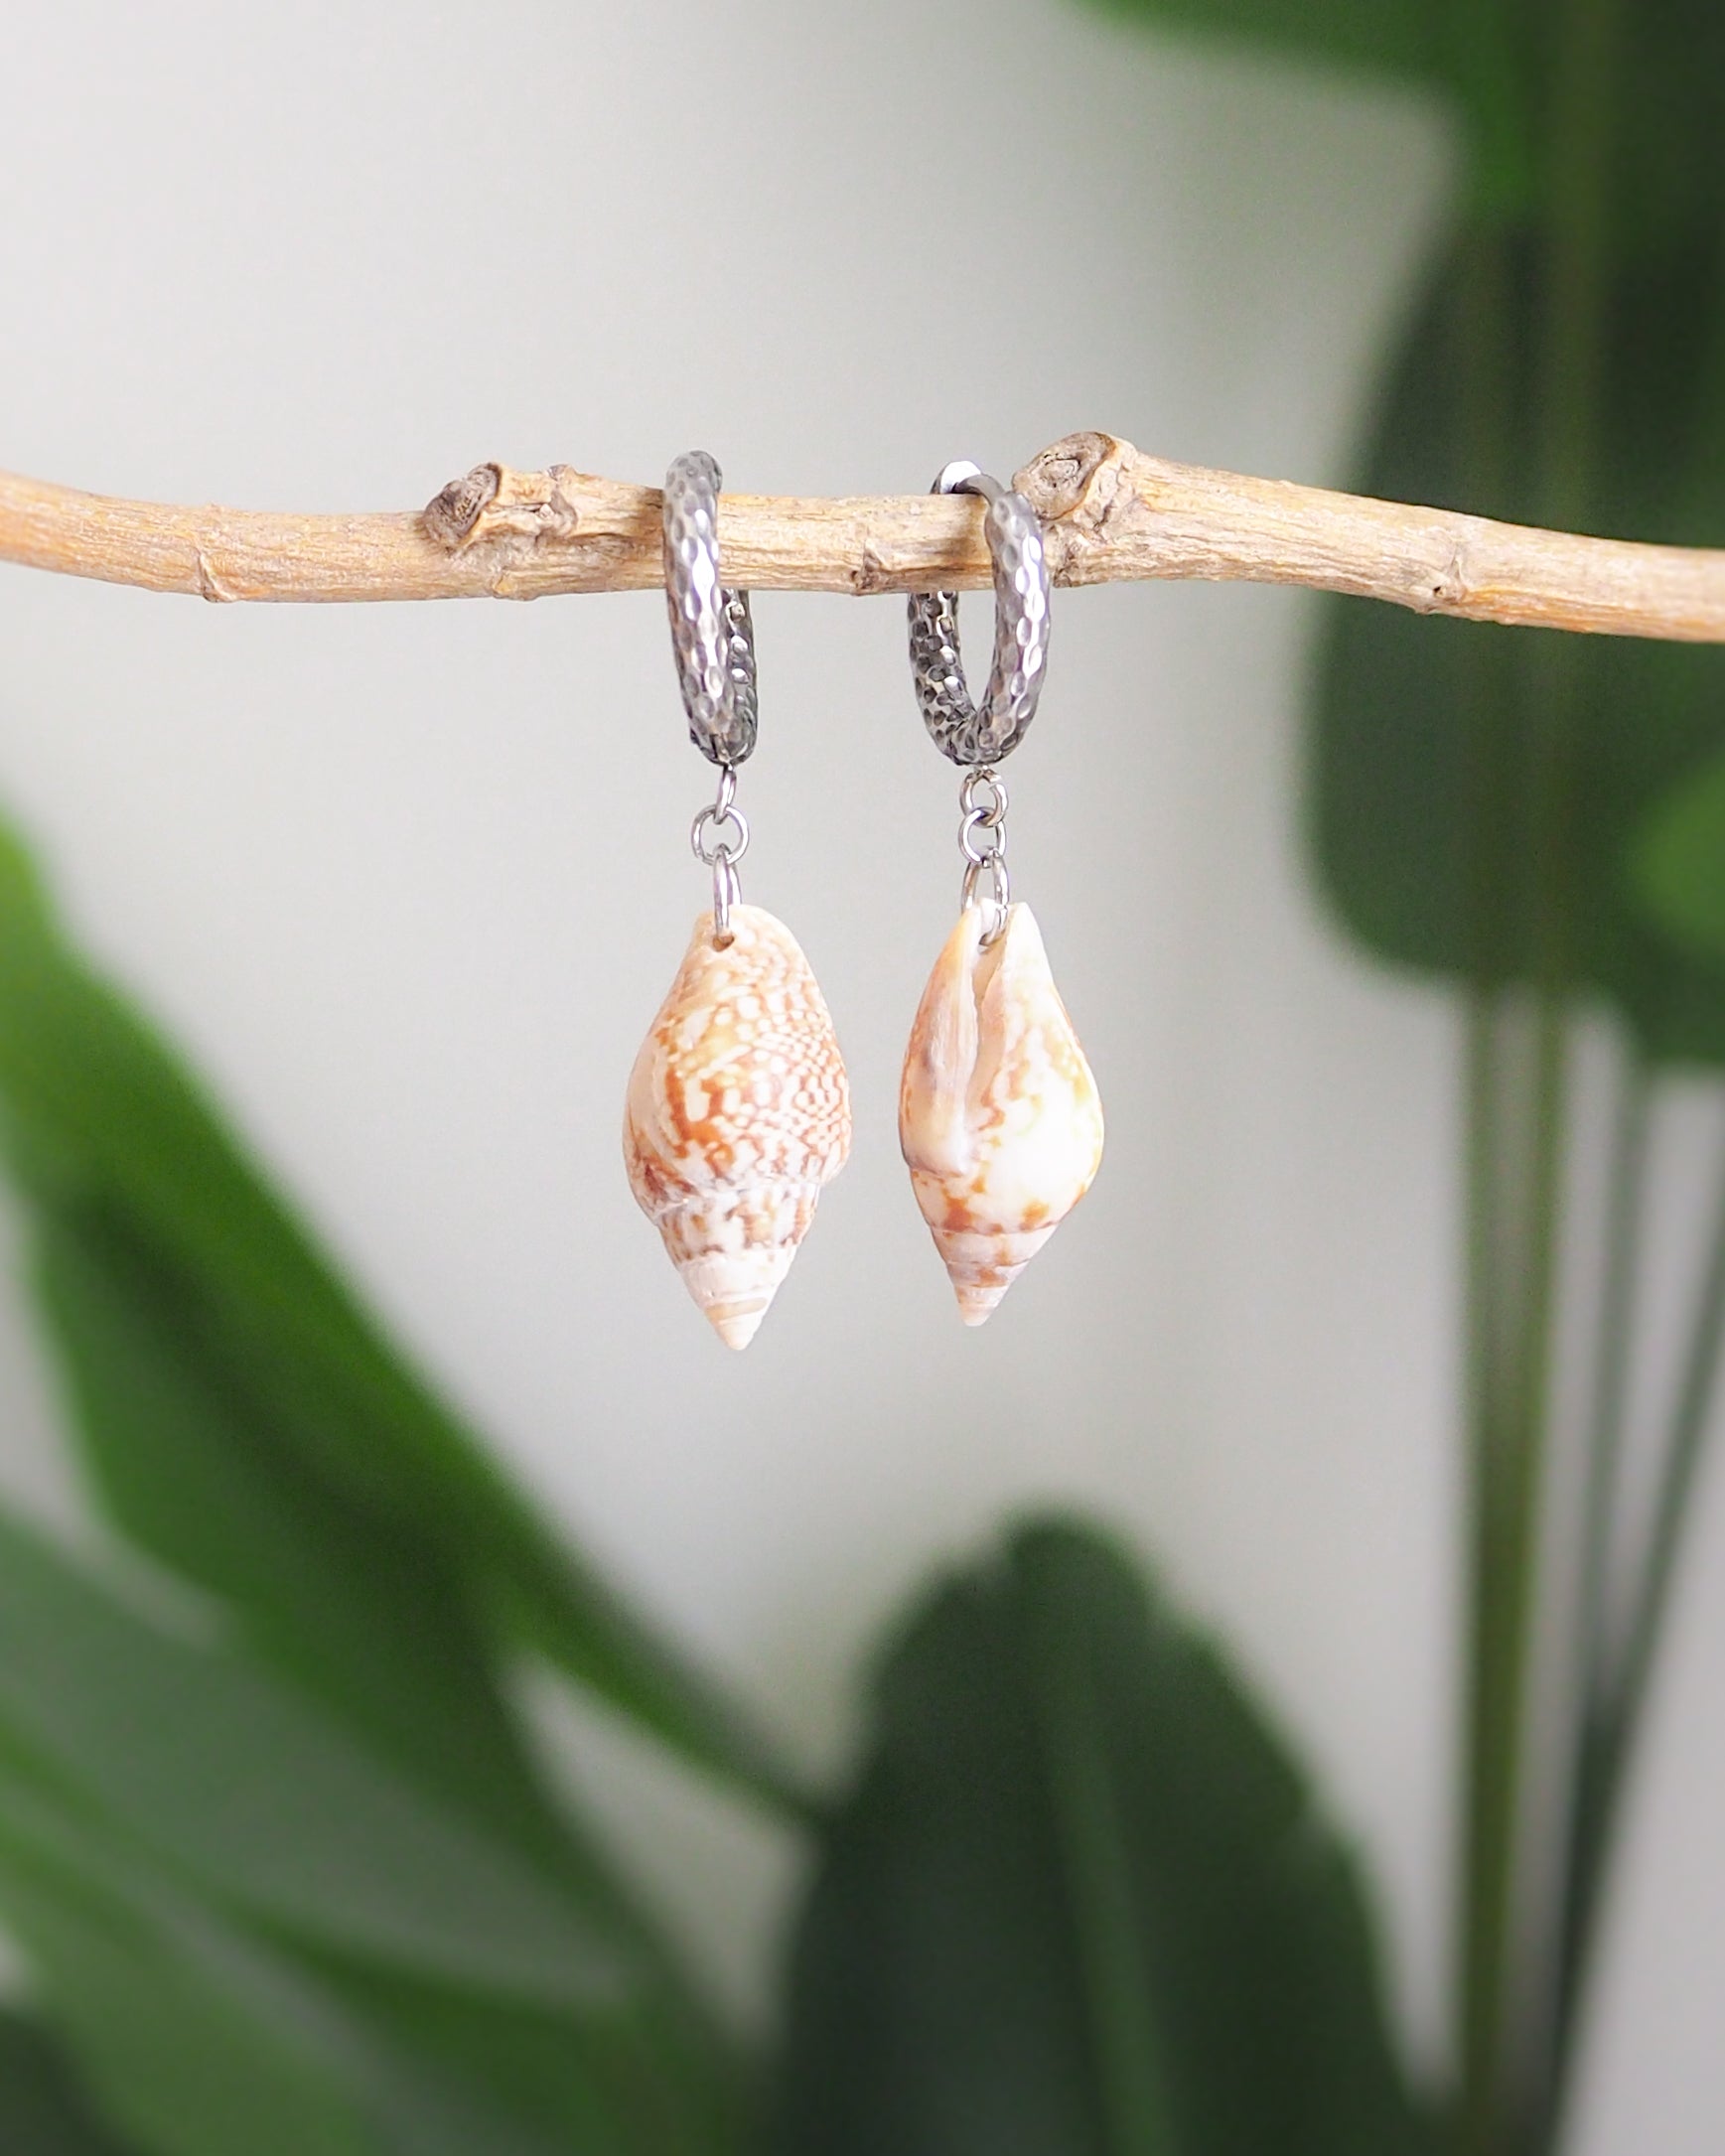 Rustic Dove Shell Earrings with Silver Hoop Hooks